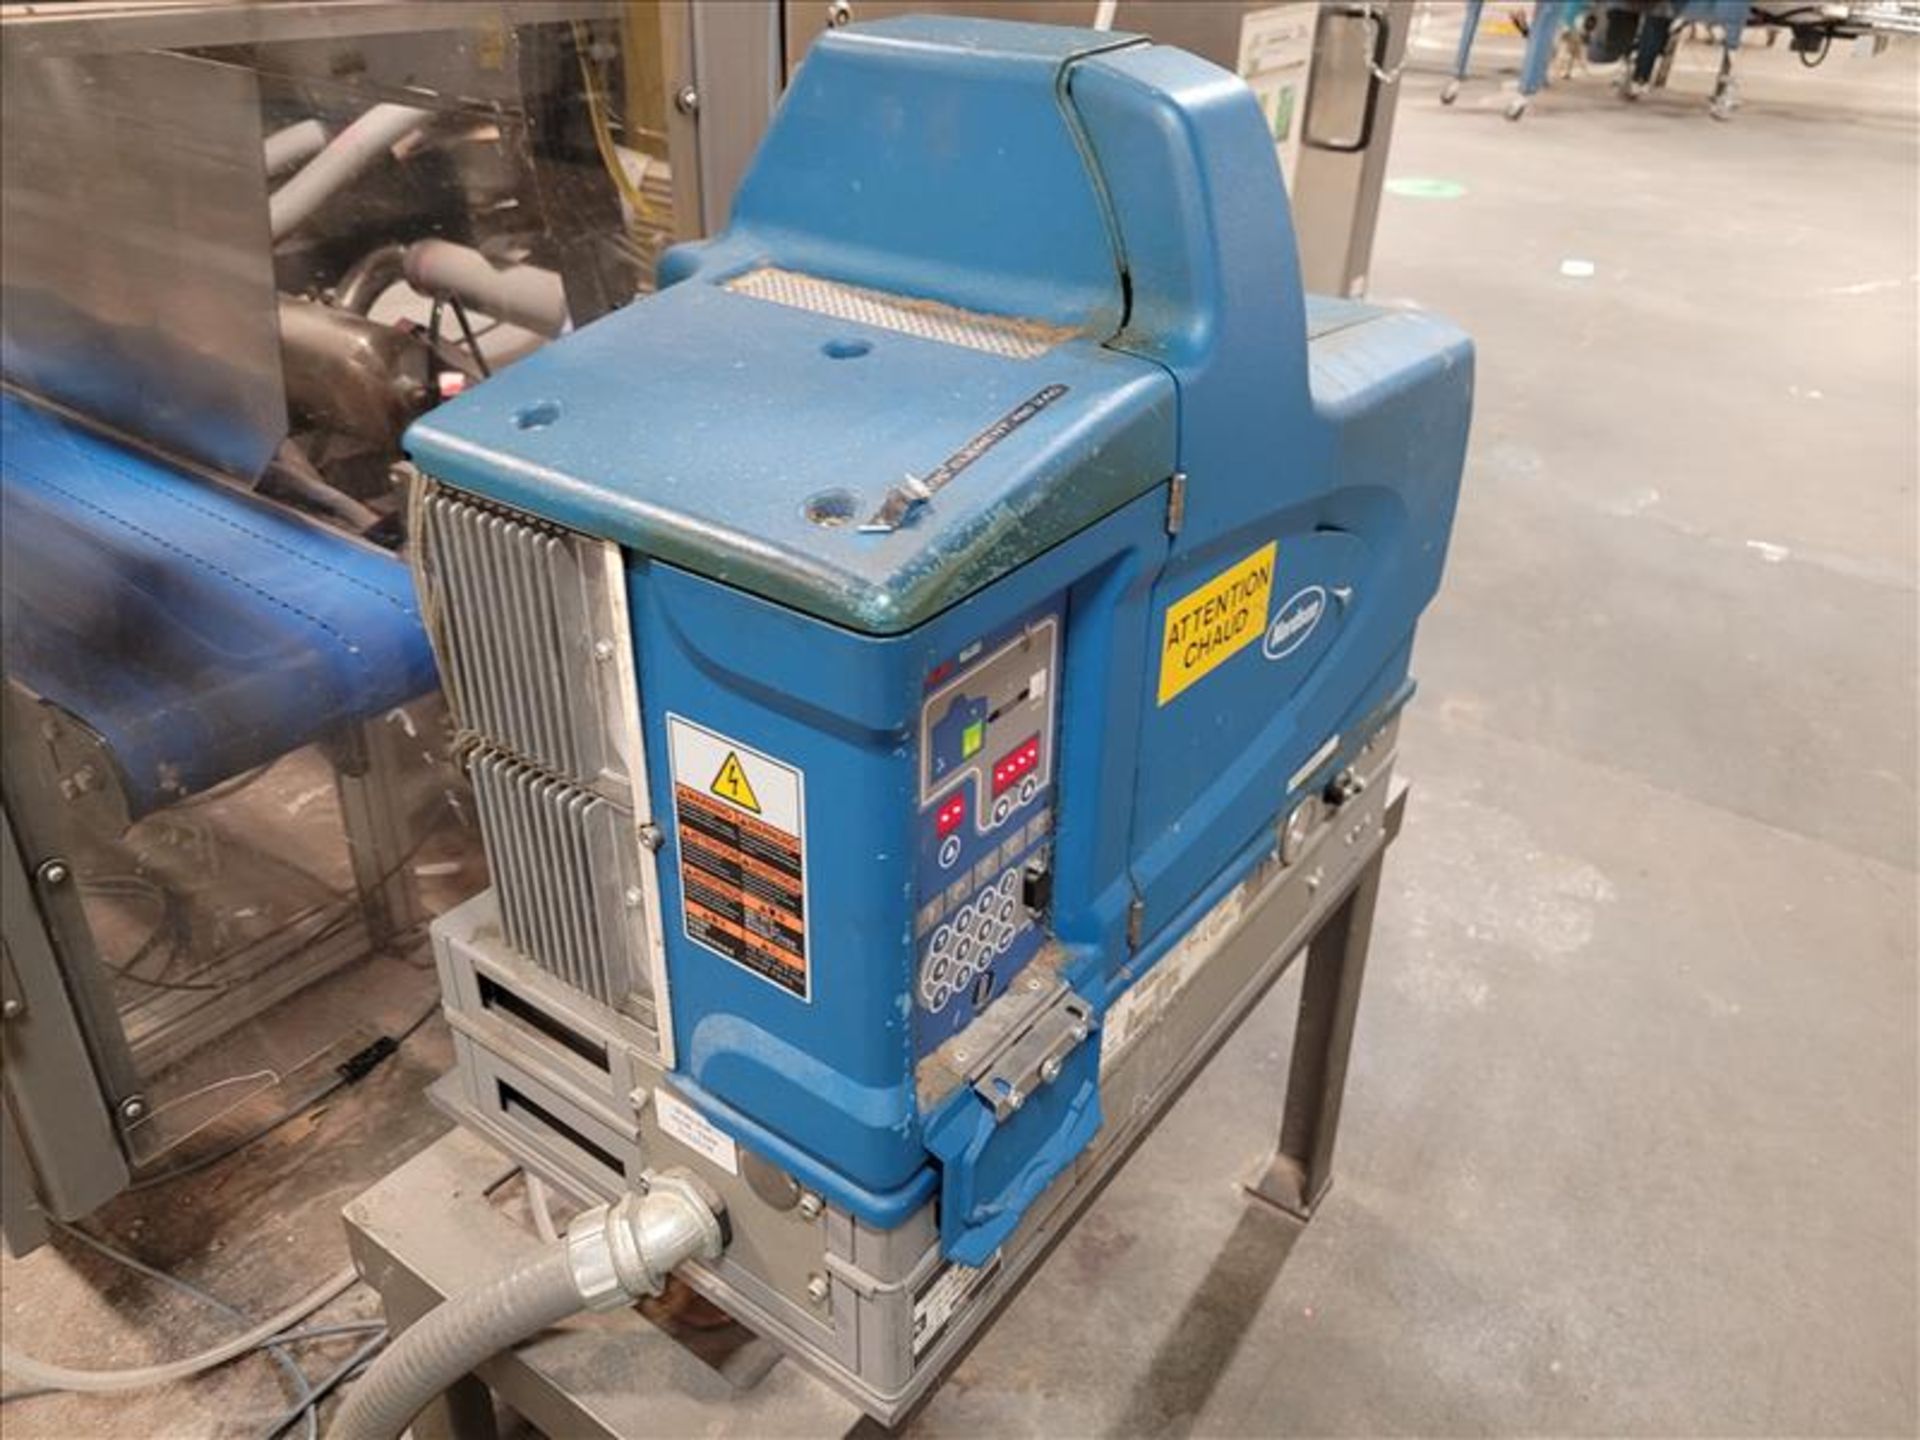 2008 BRADMAN LAKE INC. Tray Foamer, Machine Type: SUPER HS, ser. 16003, 480 Volts, 3 Phase, with - Image 28 of 35